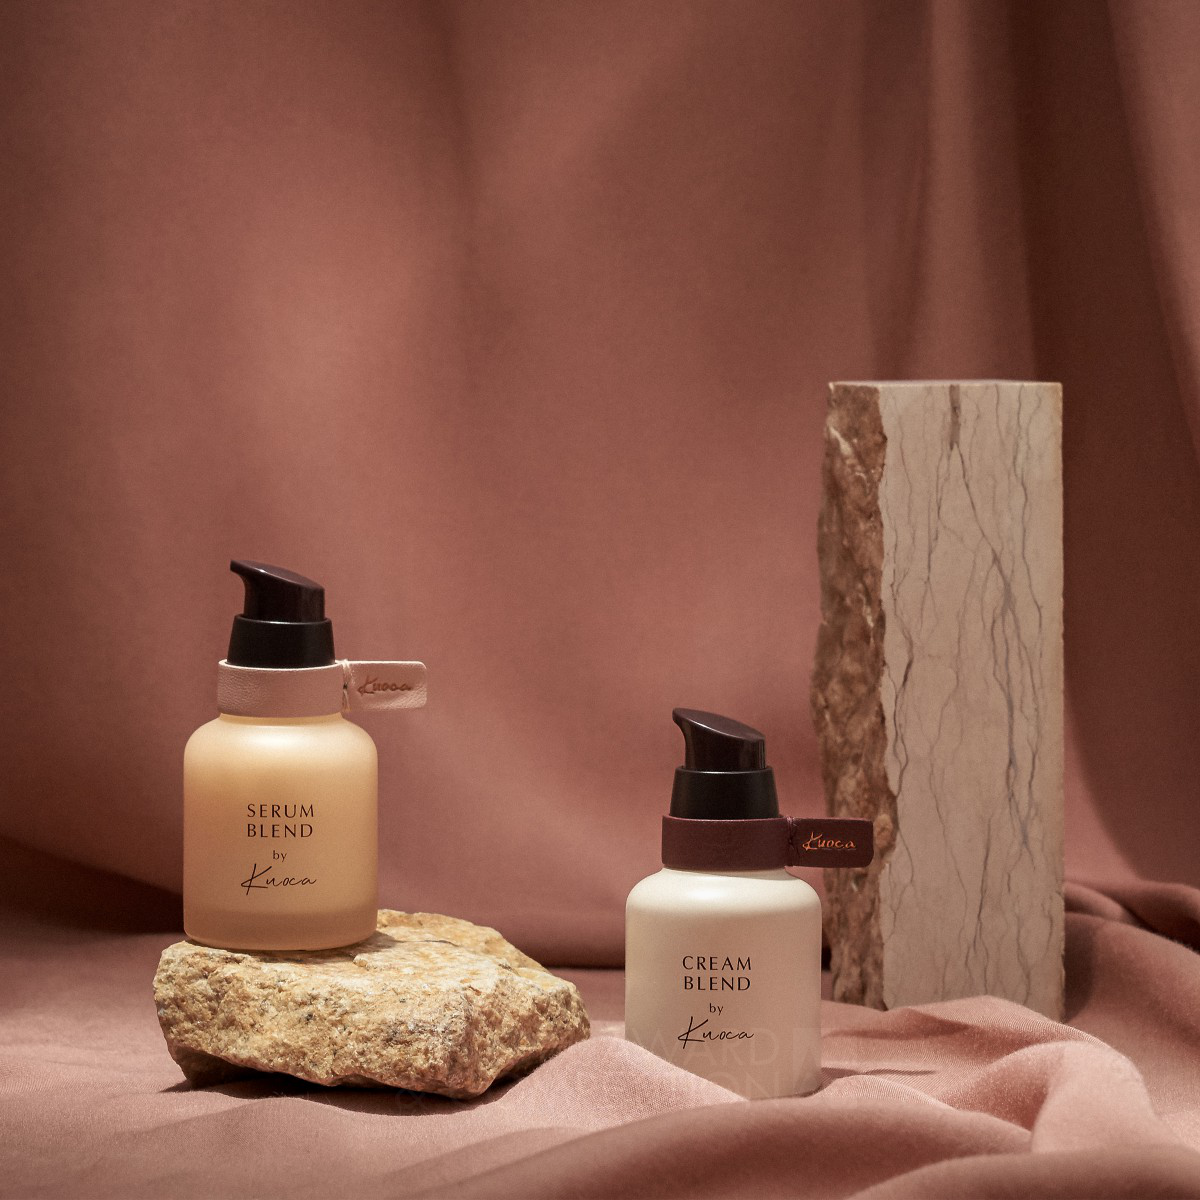 Kuoca Premium Blends Cosmetics by Minwoo Song Golden Beauty, Personal Care and Cosmetic Products Design Award Winner 2021 